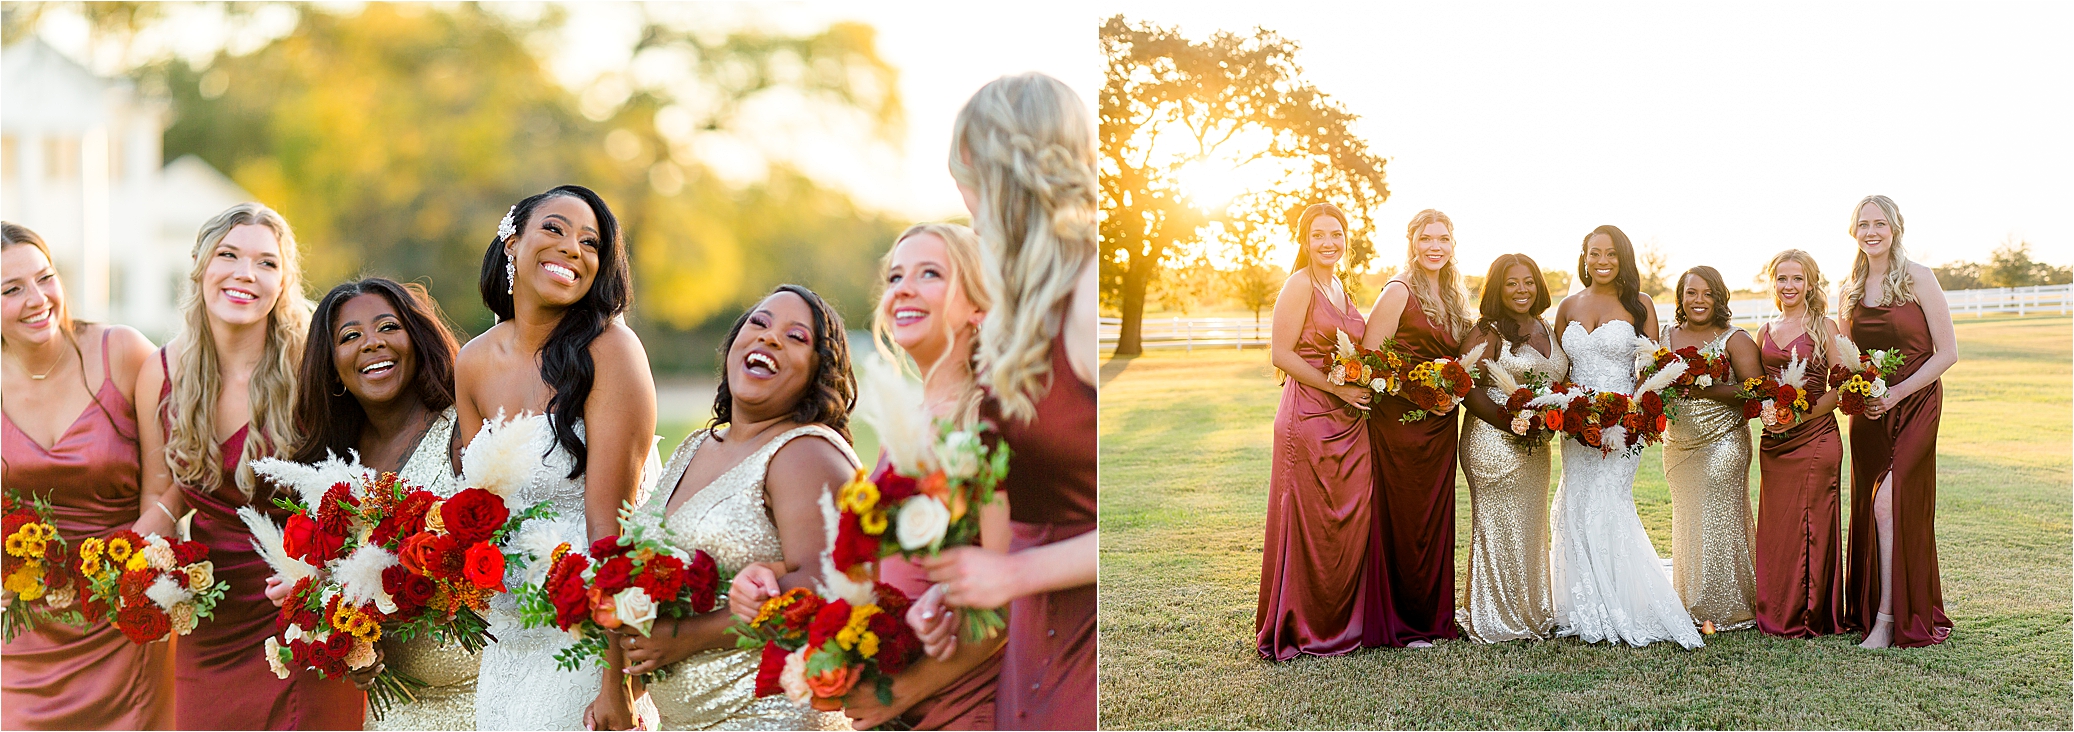 A bride and her bridesmaids smile and laugh at The MIlestone by Boerne Wedding Photographer Jillian Hogan 